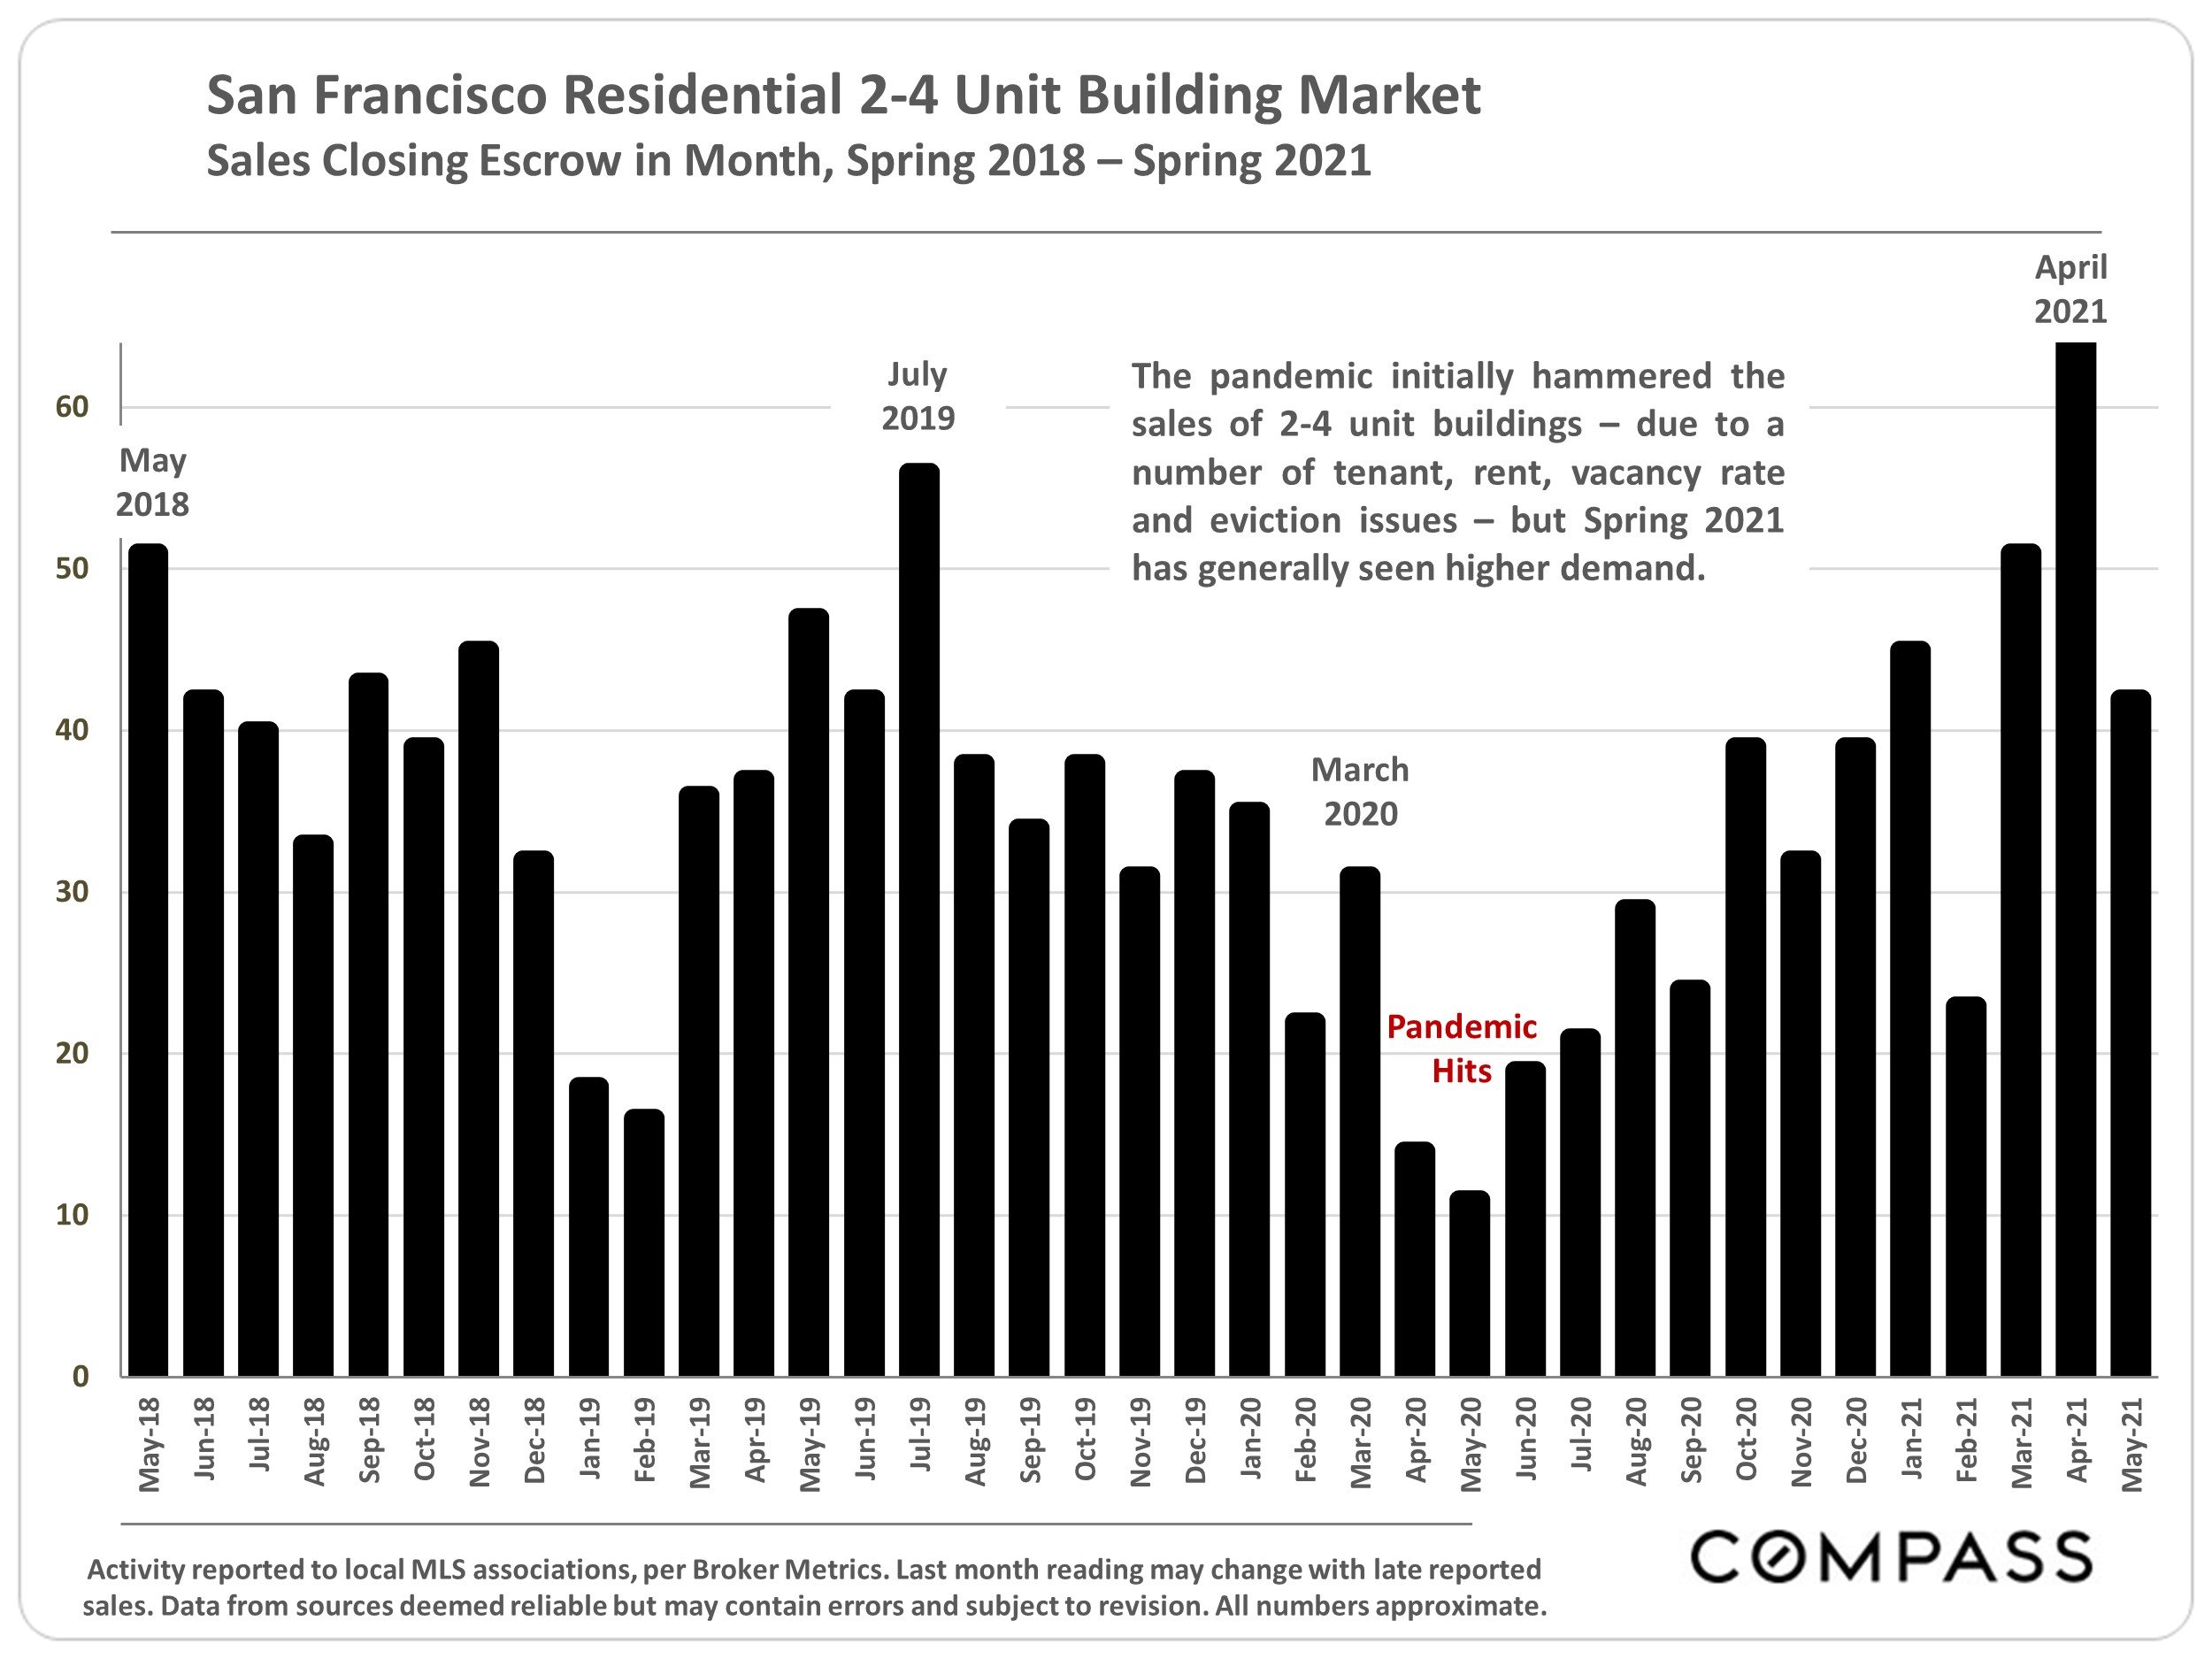 Chart showing theSan Francisco Residential 2-4 Unit Building Market, Sales Closing Escrow in MOnth, Spring 2018 - Spring 2021